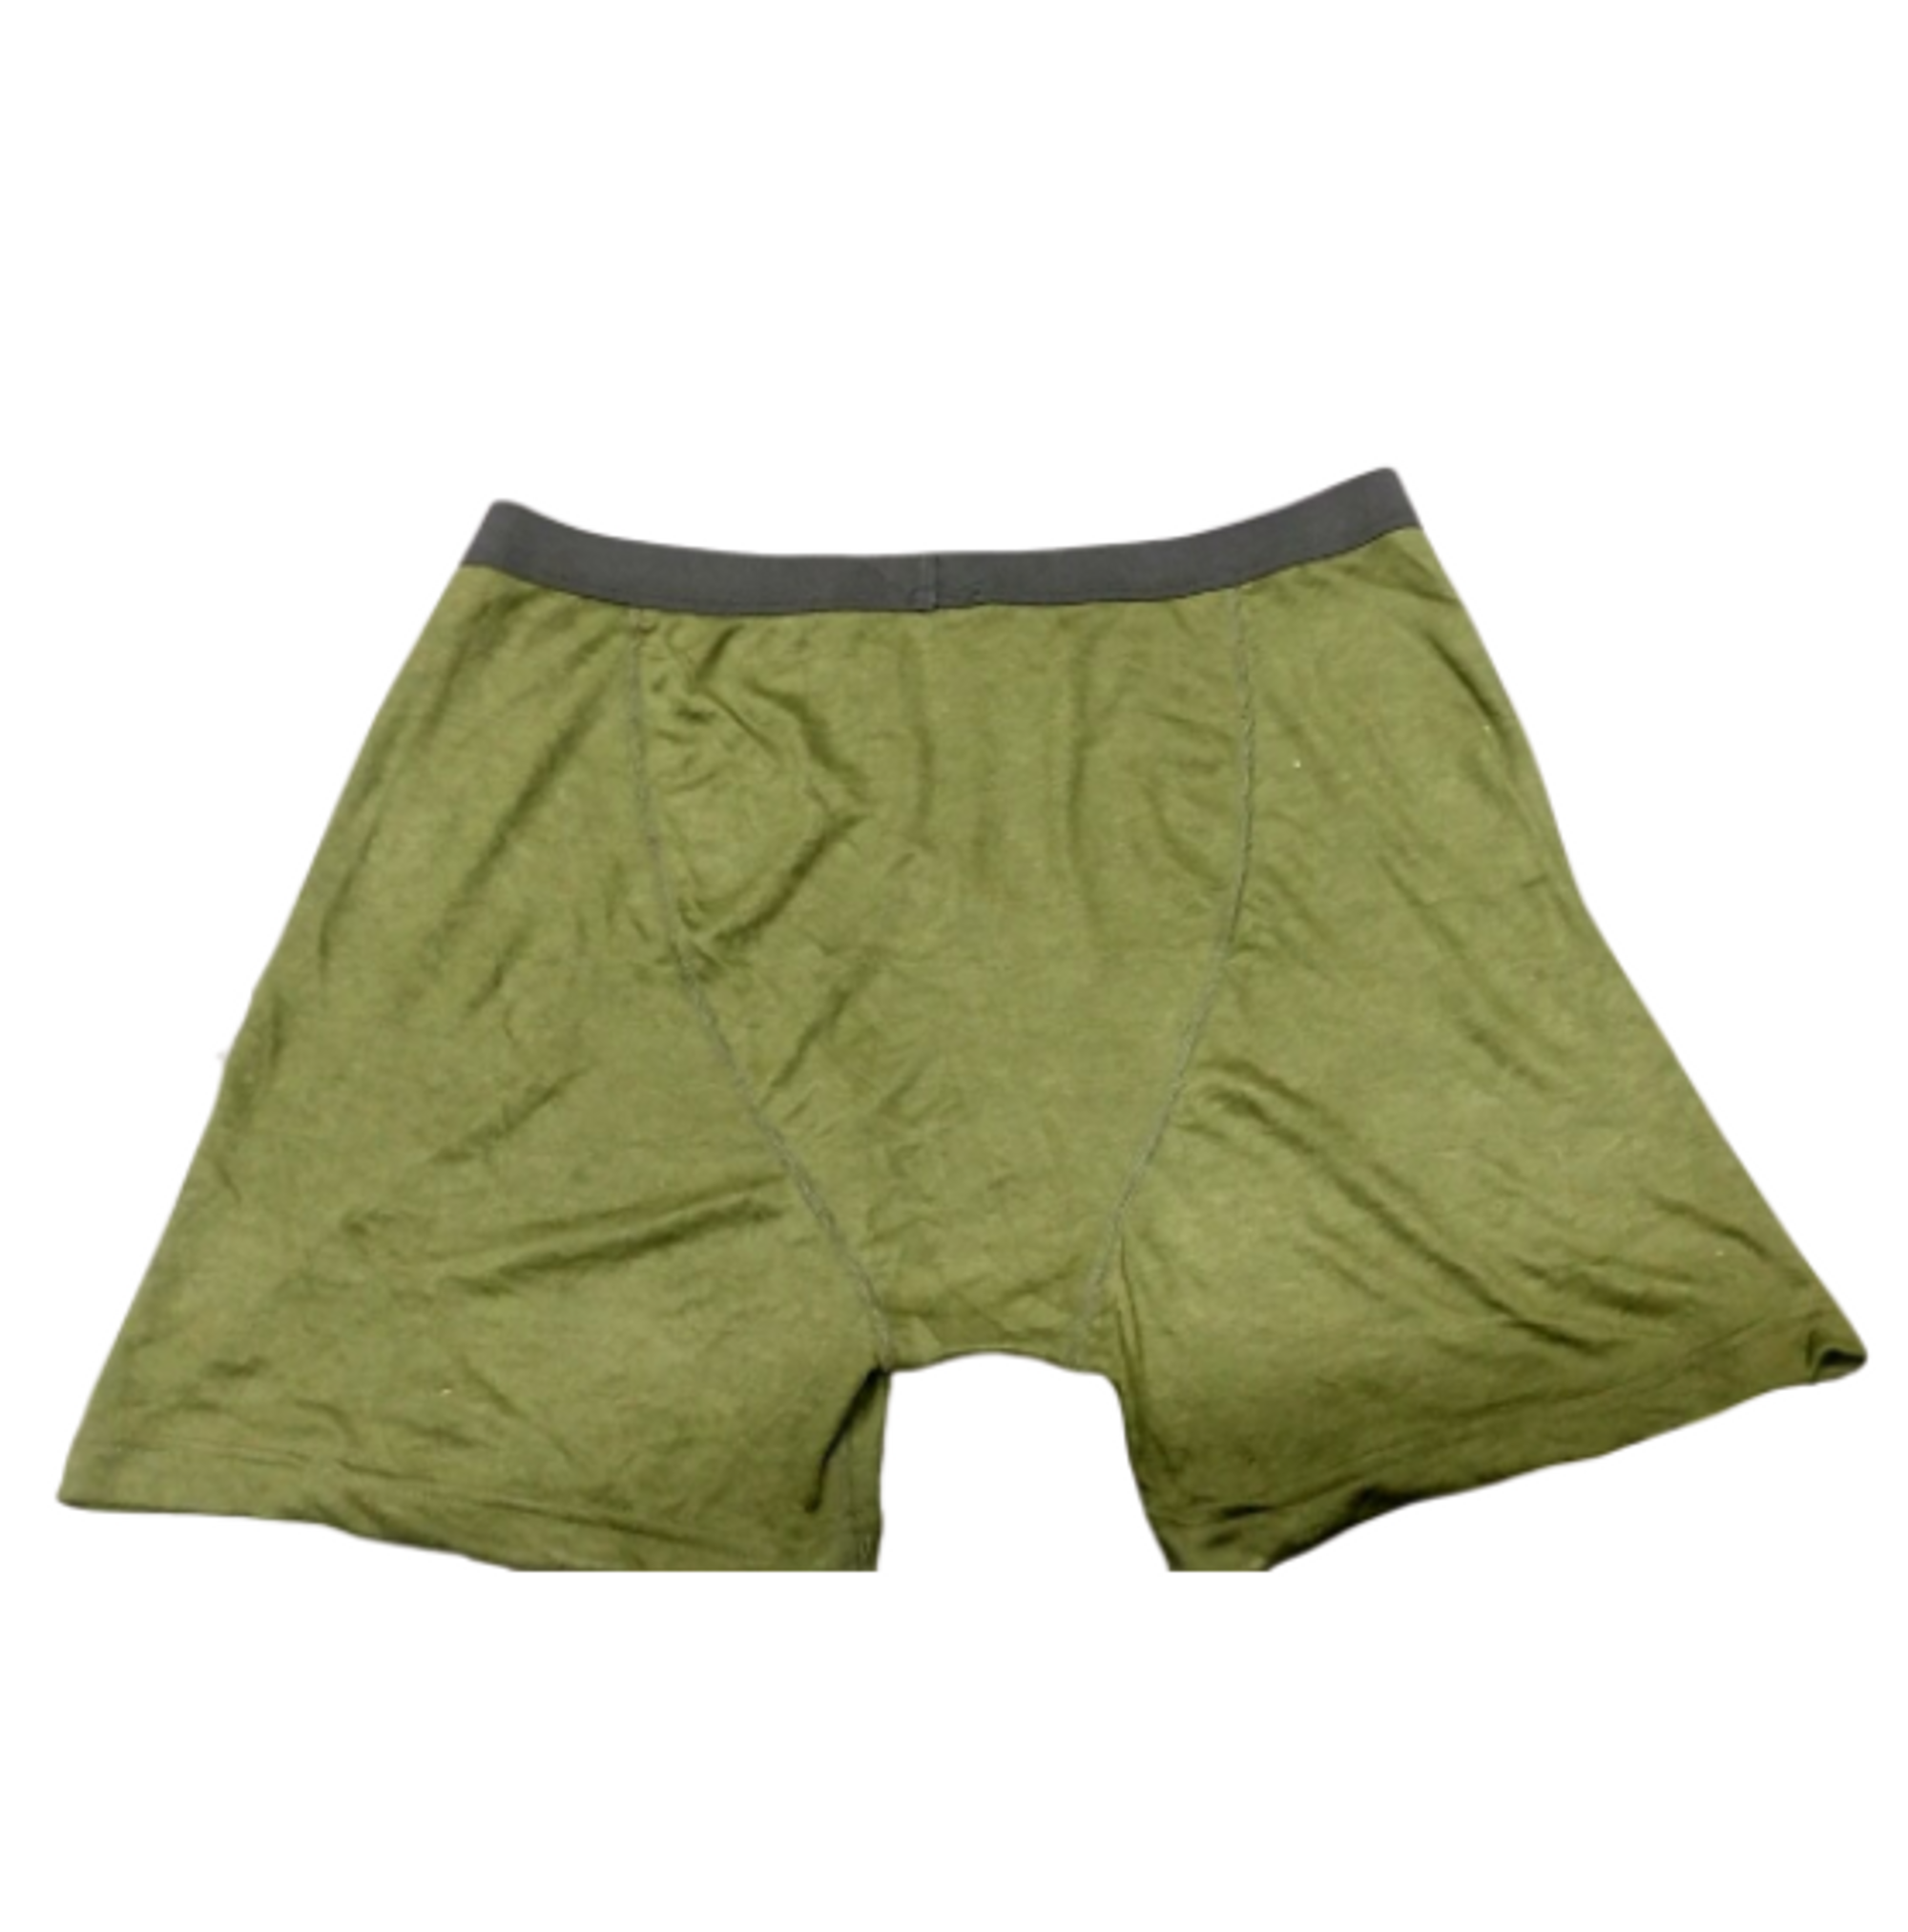 Canadian Armed Forces Temperate Underwear/Boxers